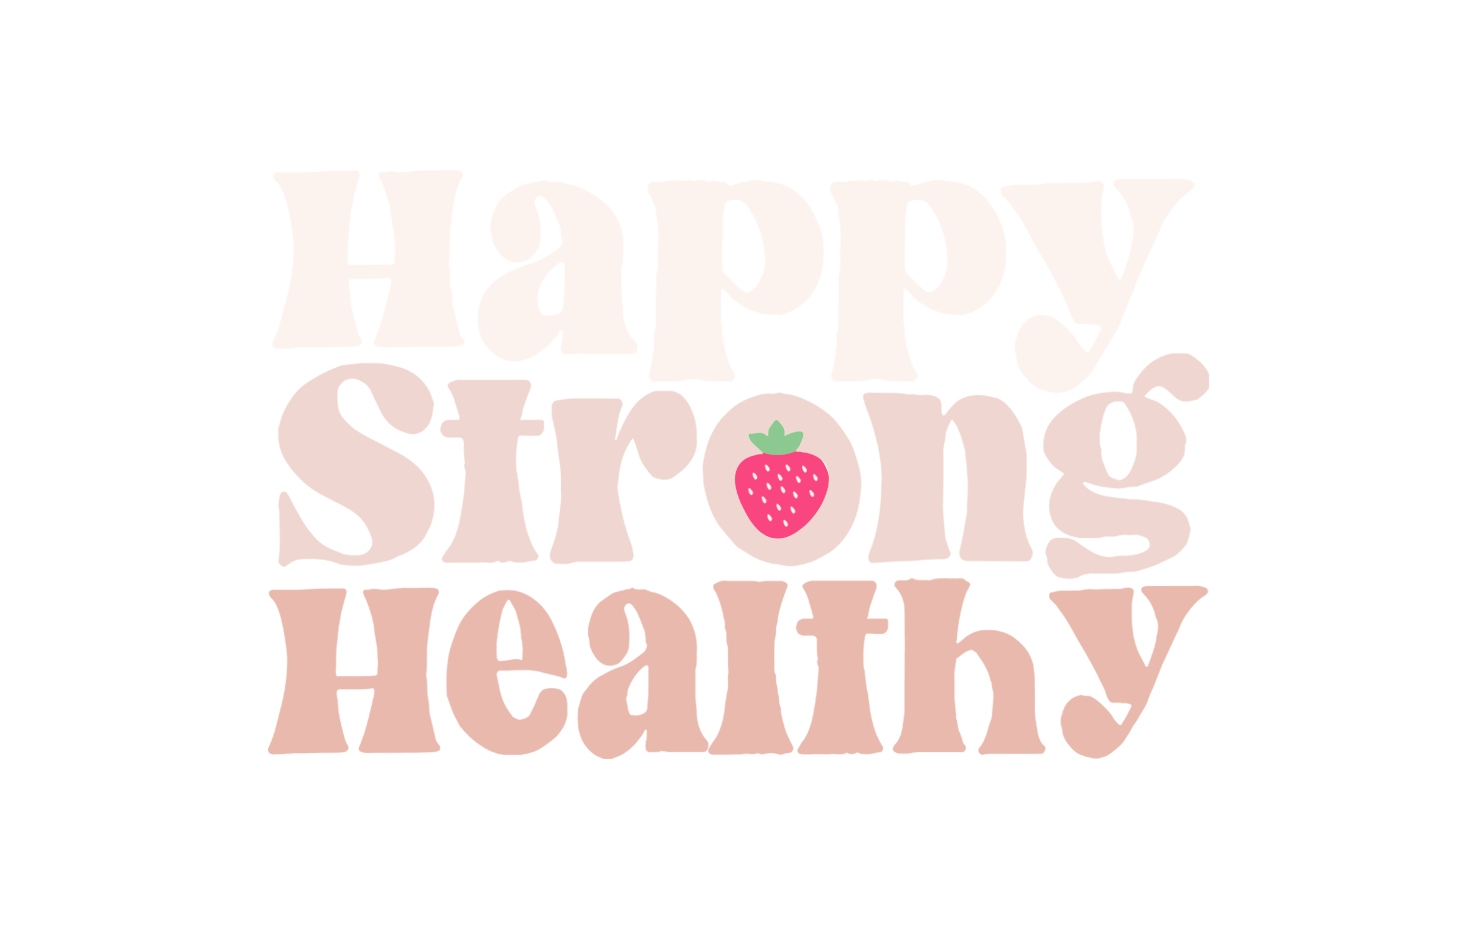 Happy Strong Healthy | Weight Neutral Virtual Nutrition Services